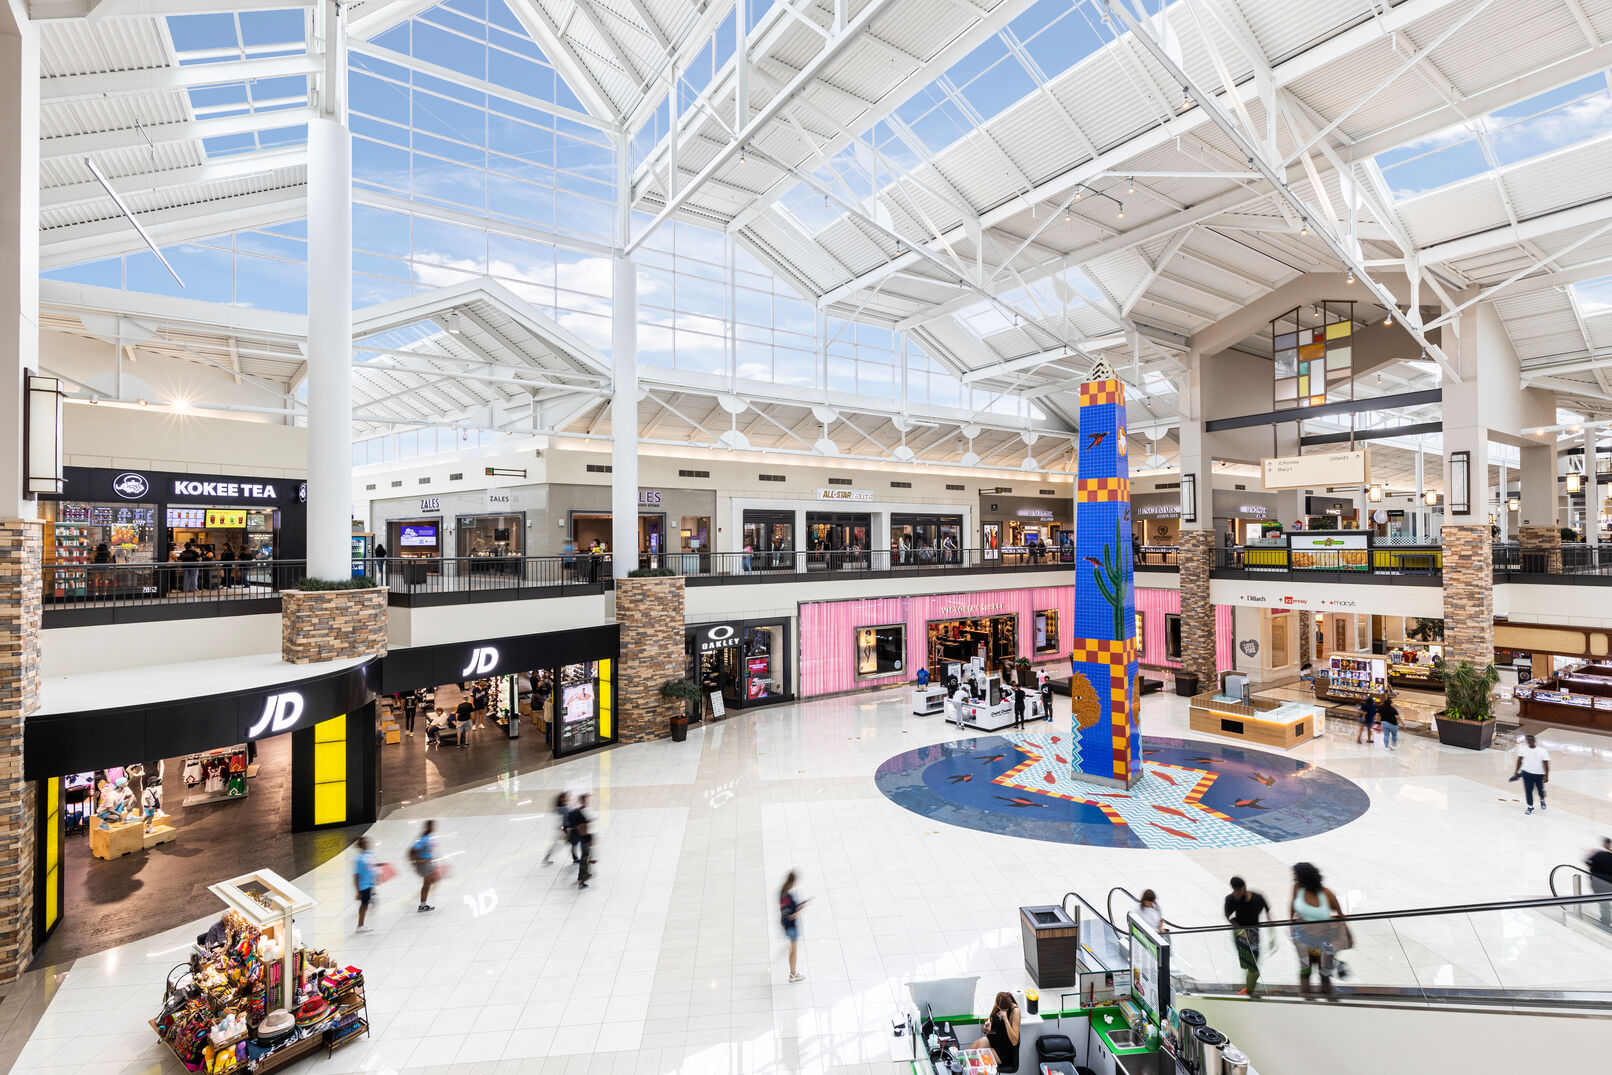 Interior of the shopping center The Parks Mall at Arlington showing several store fronts and kiosks